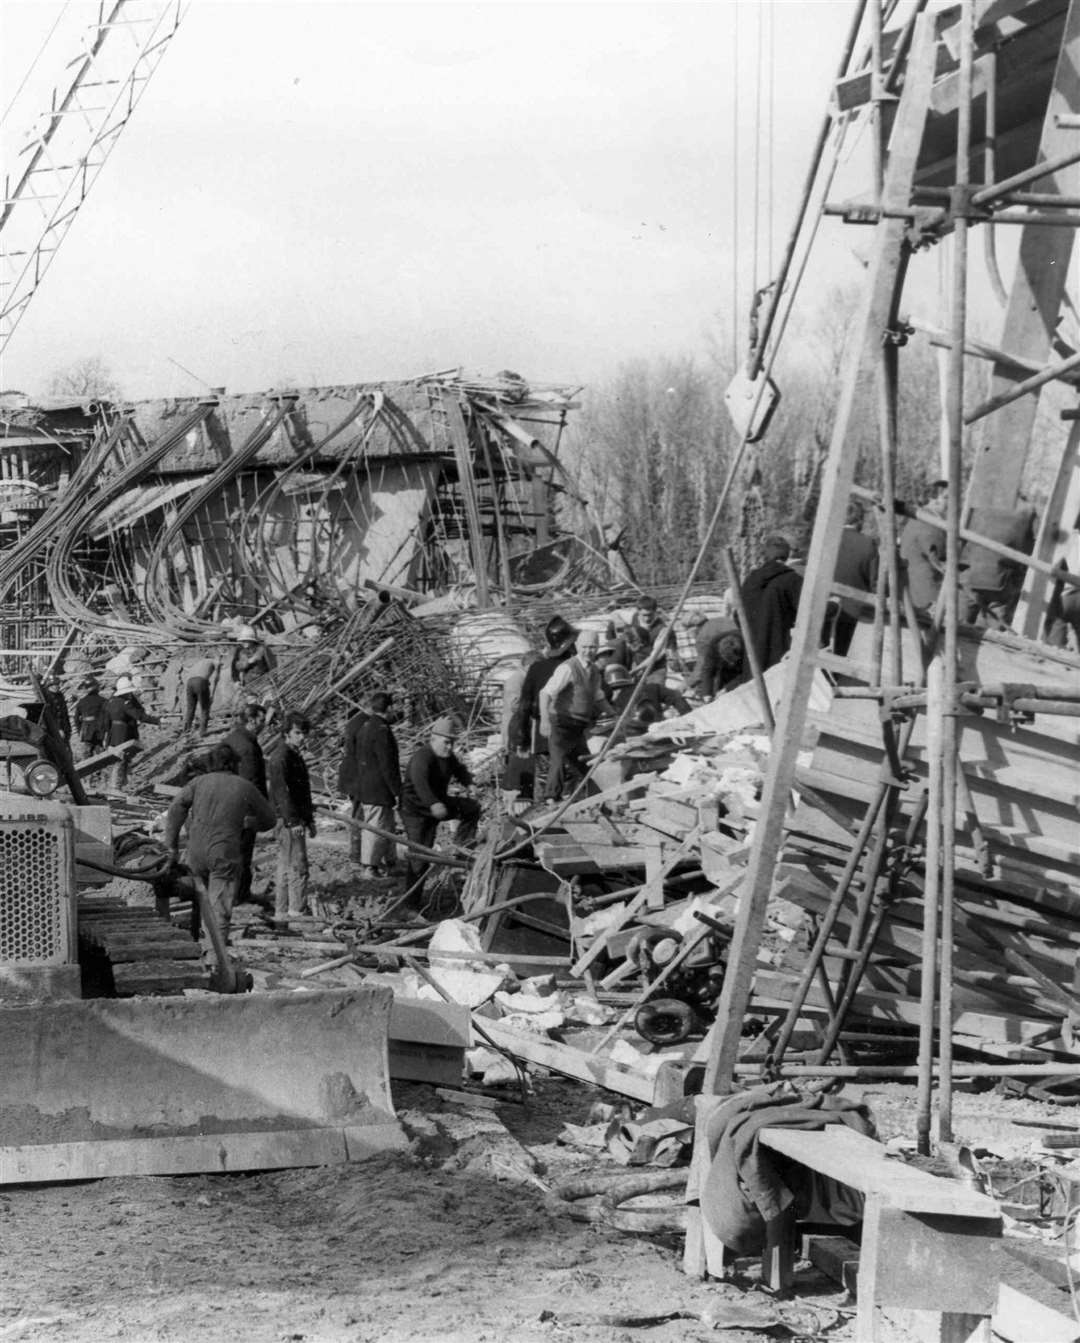 In March 1971, the dramatic collapse of a 230 foot long motorway bridge near Leybourne over the M20, was, at the time, one of the worst civil engineering disasters in British history. Picture: 'Kent Our Century by The People Who Lived It'